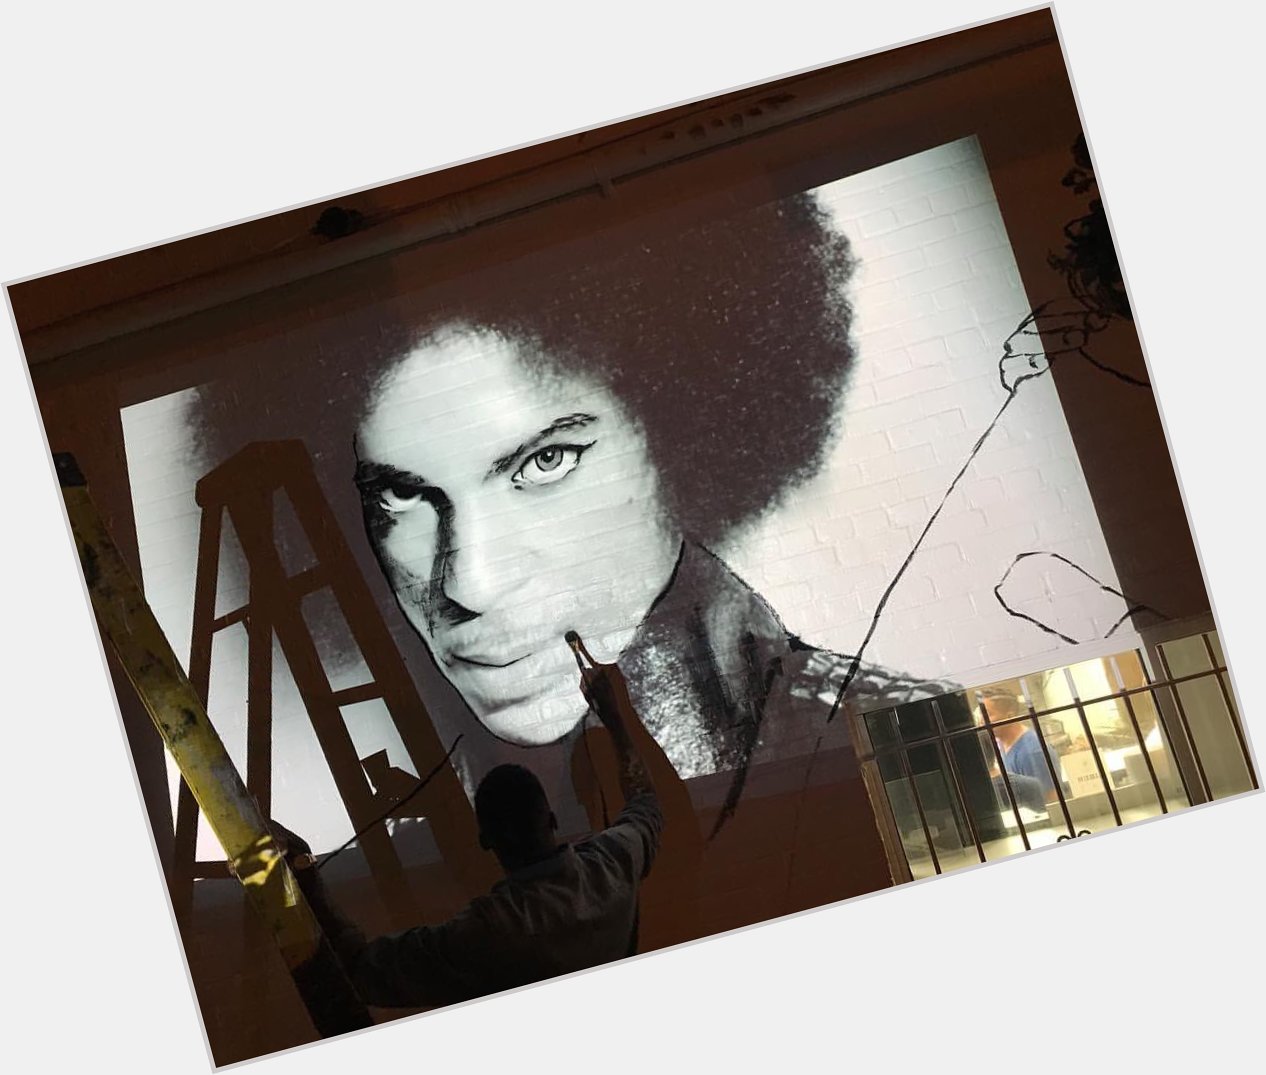 Happy Birthday Prince Rogers Nelson. In music, memories & murals, u live 4 ever. 